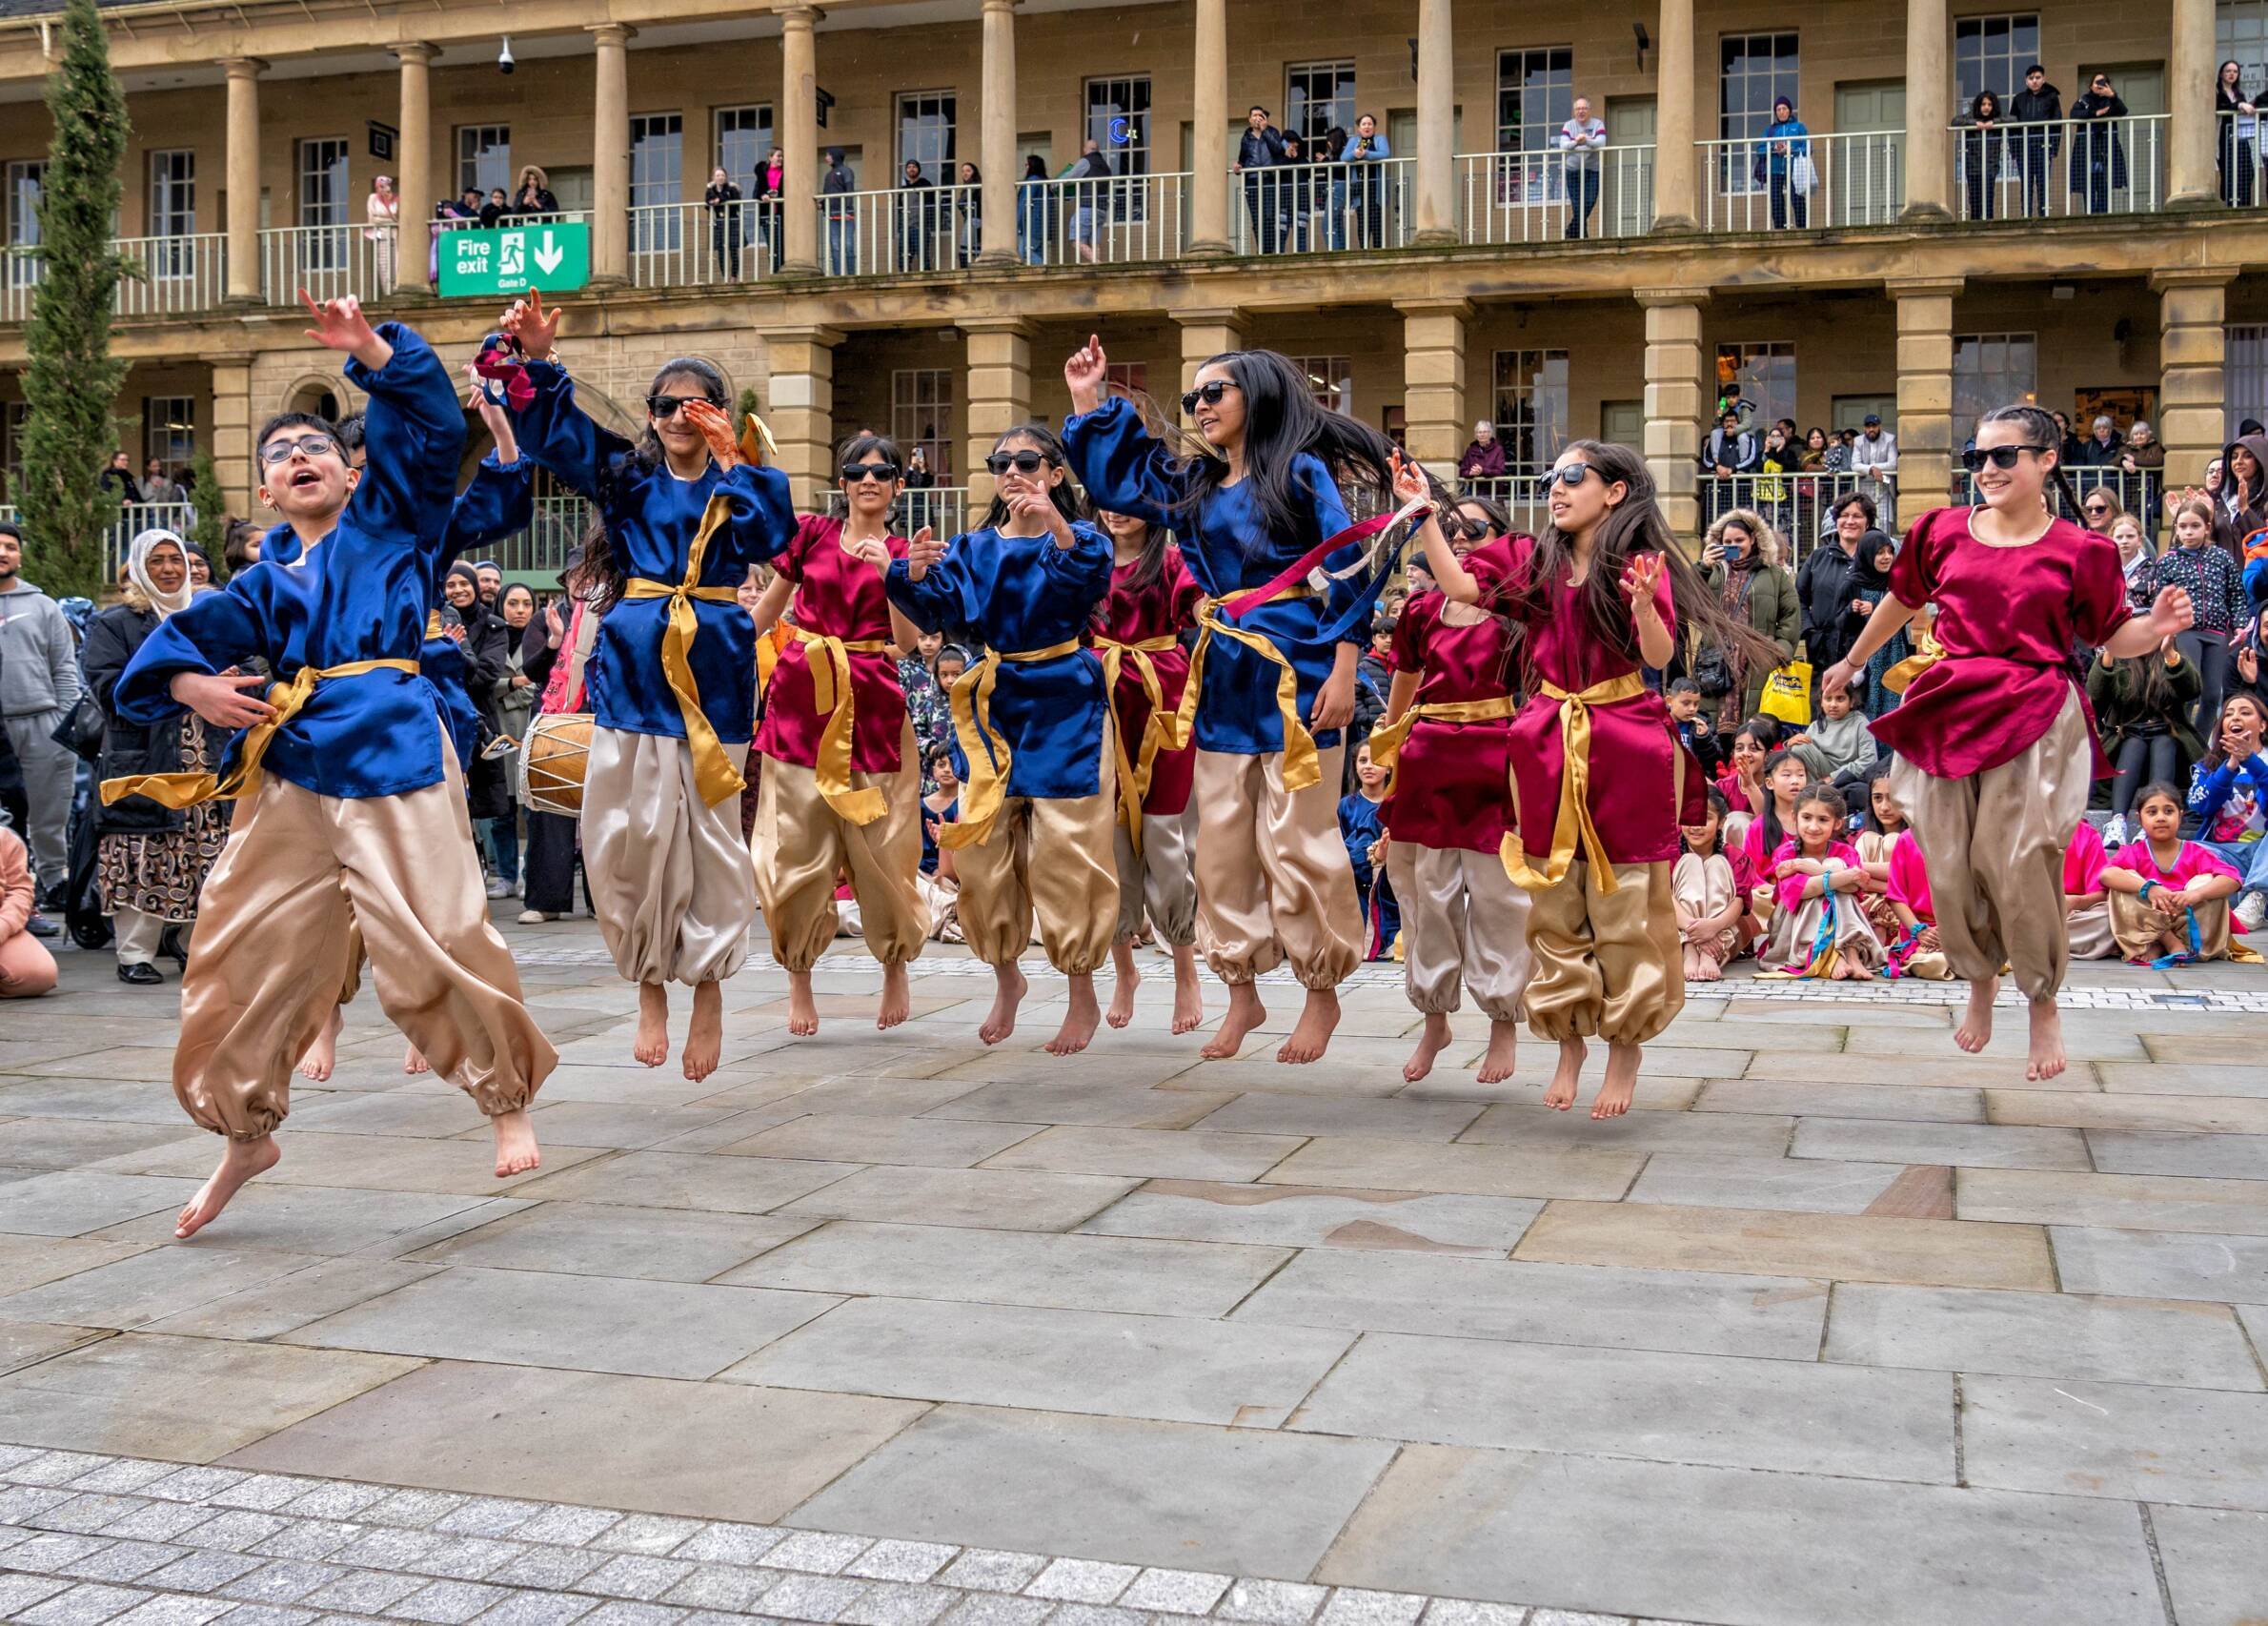 Parkinson Lane Community Primary School dancers at the Piece Hall - credit Ant Robling